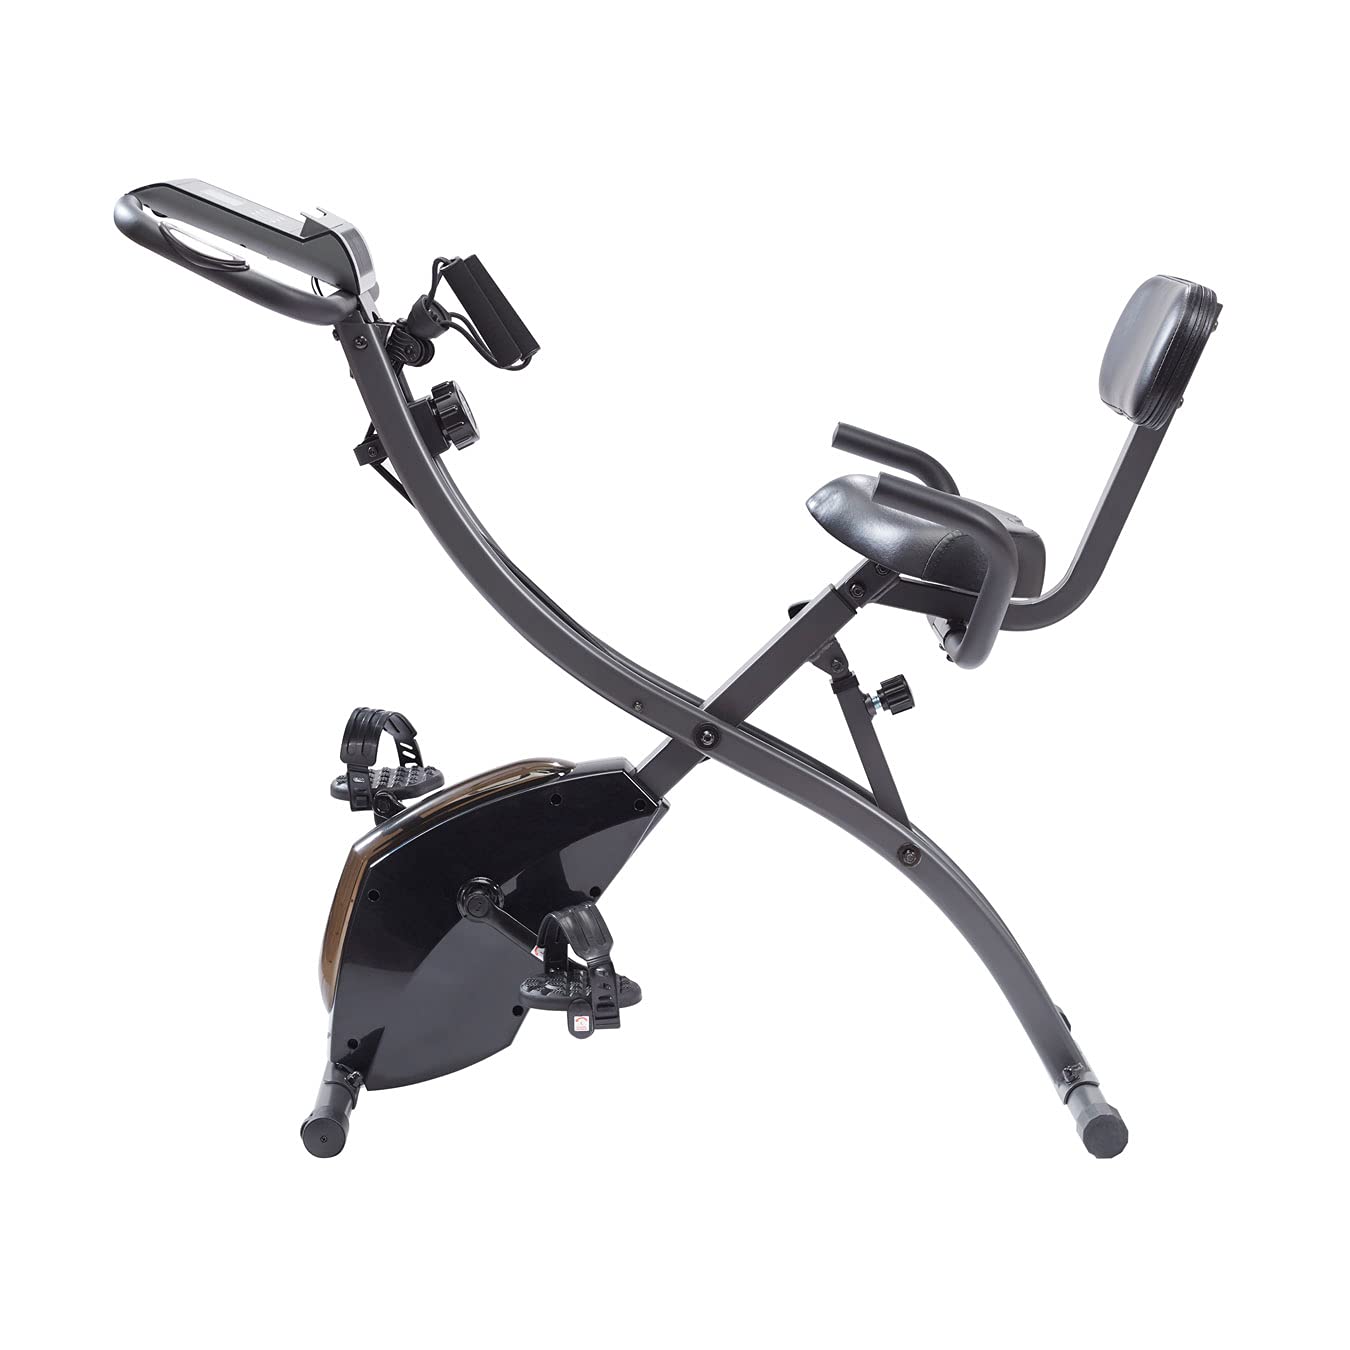 Review of the Slim Cycle 2-in-1 Exercise Bike